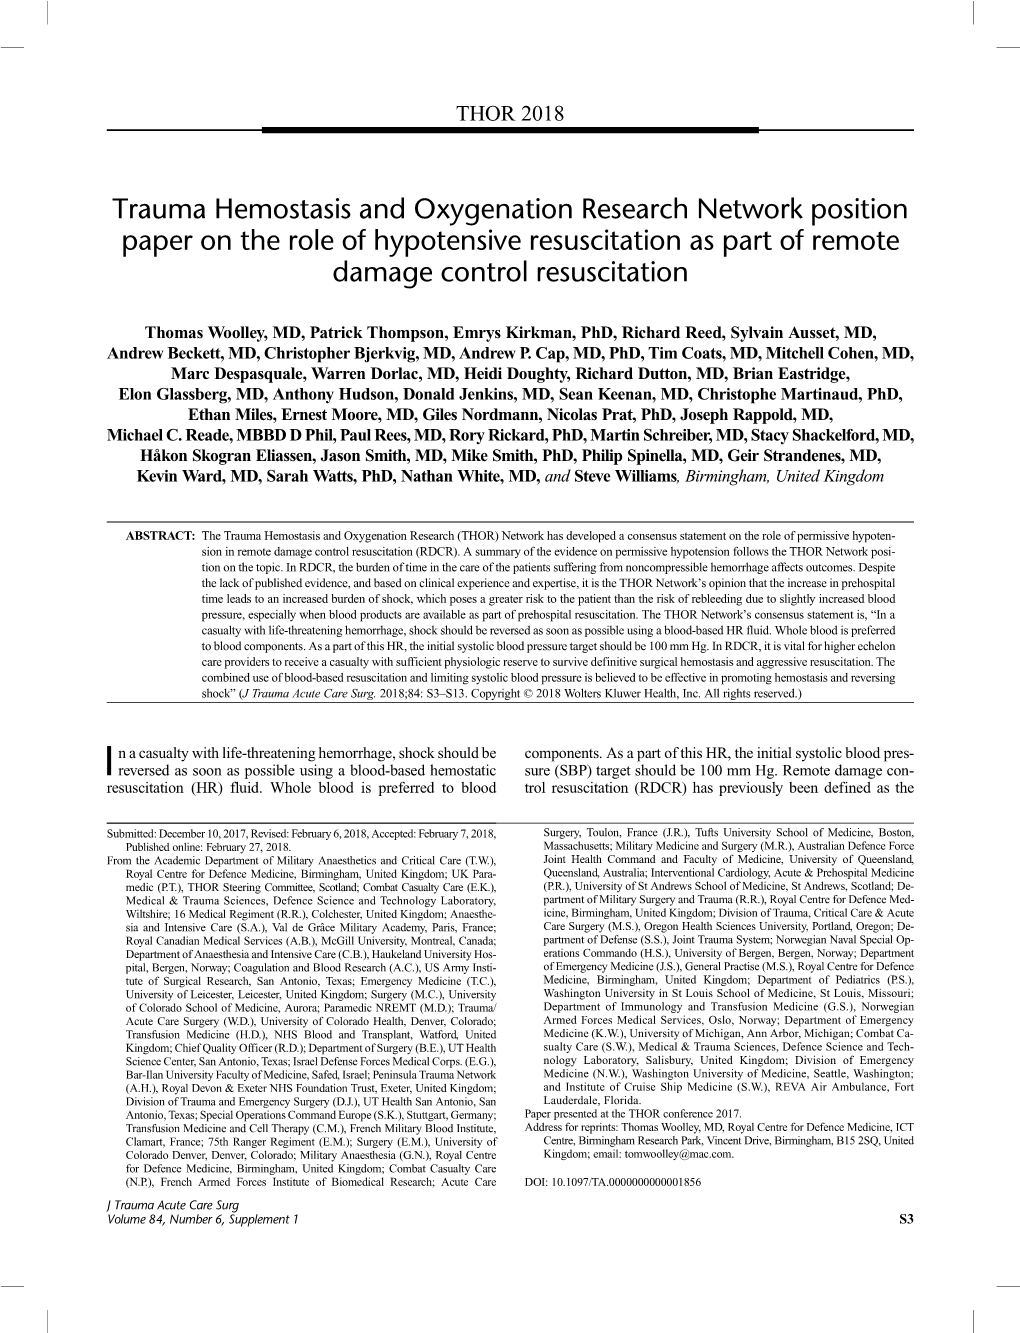 Trauma Hemostasis and Oxygenation Research Network Position Paper on the Role of Hypotensive Resuscitation As Part of Remote Damage Control Resuscitation